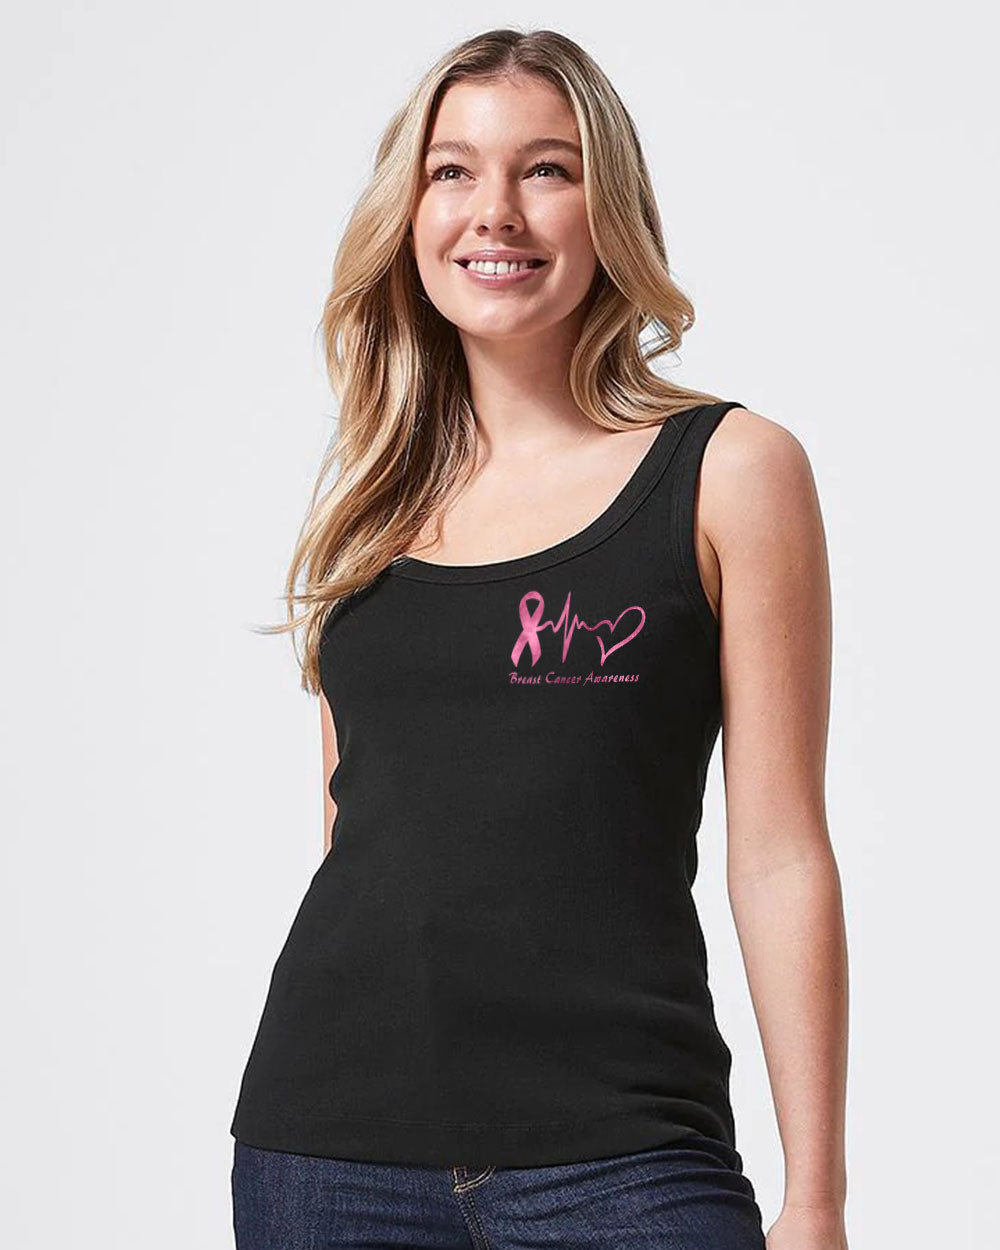 They Whispered To Her You Cannot Withstand The Storm Half Wing Ribbon Women's Breast Cancer Awareness Tanks